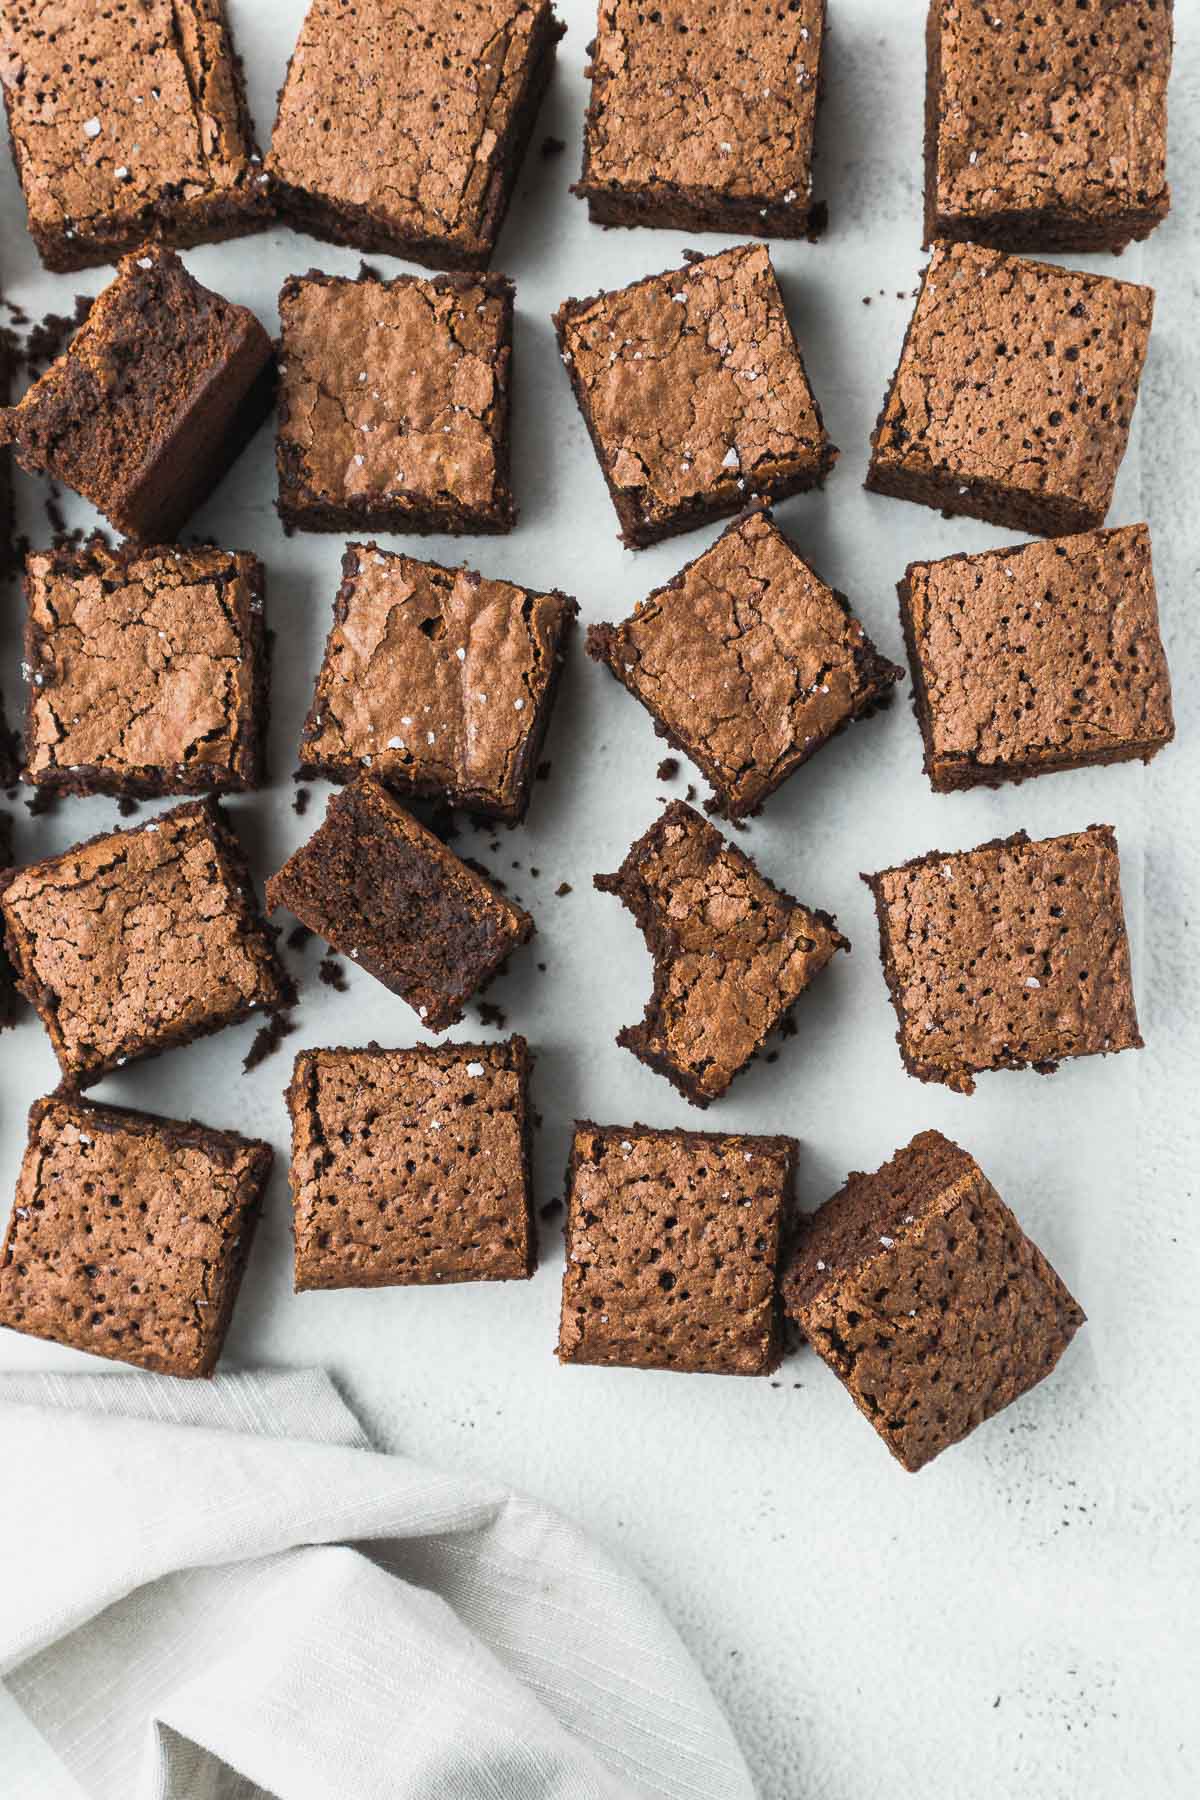 Brownies sliced and placed on parchment paper with two brownies on their sides to show the chewy centers